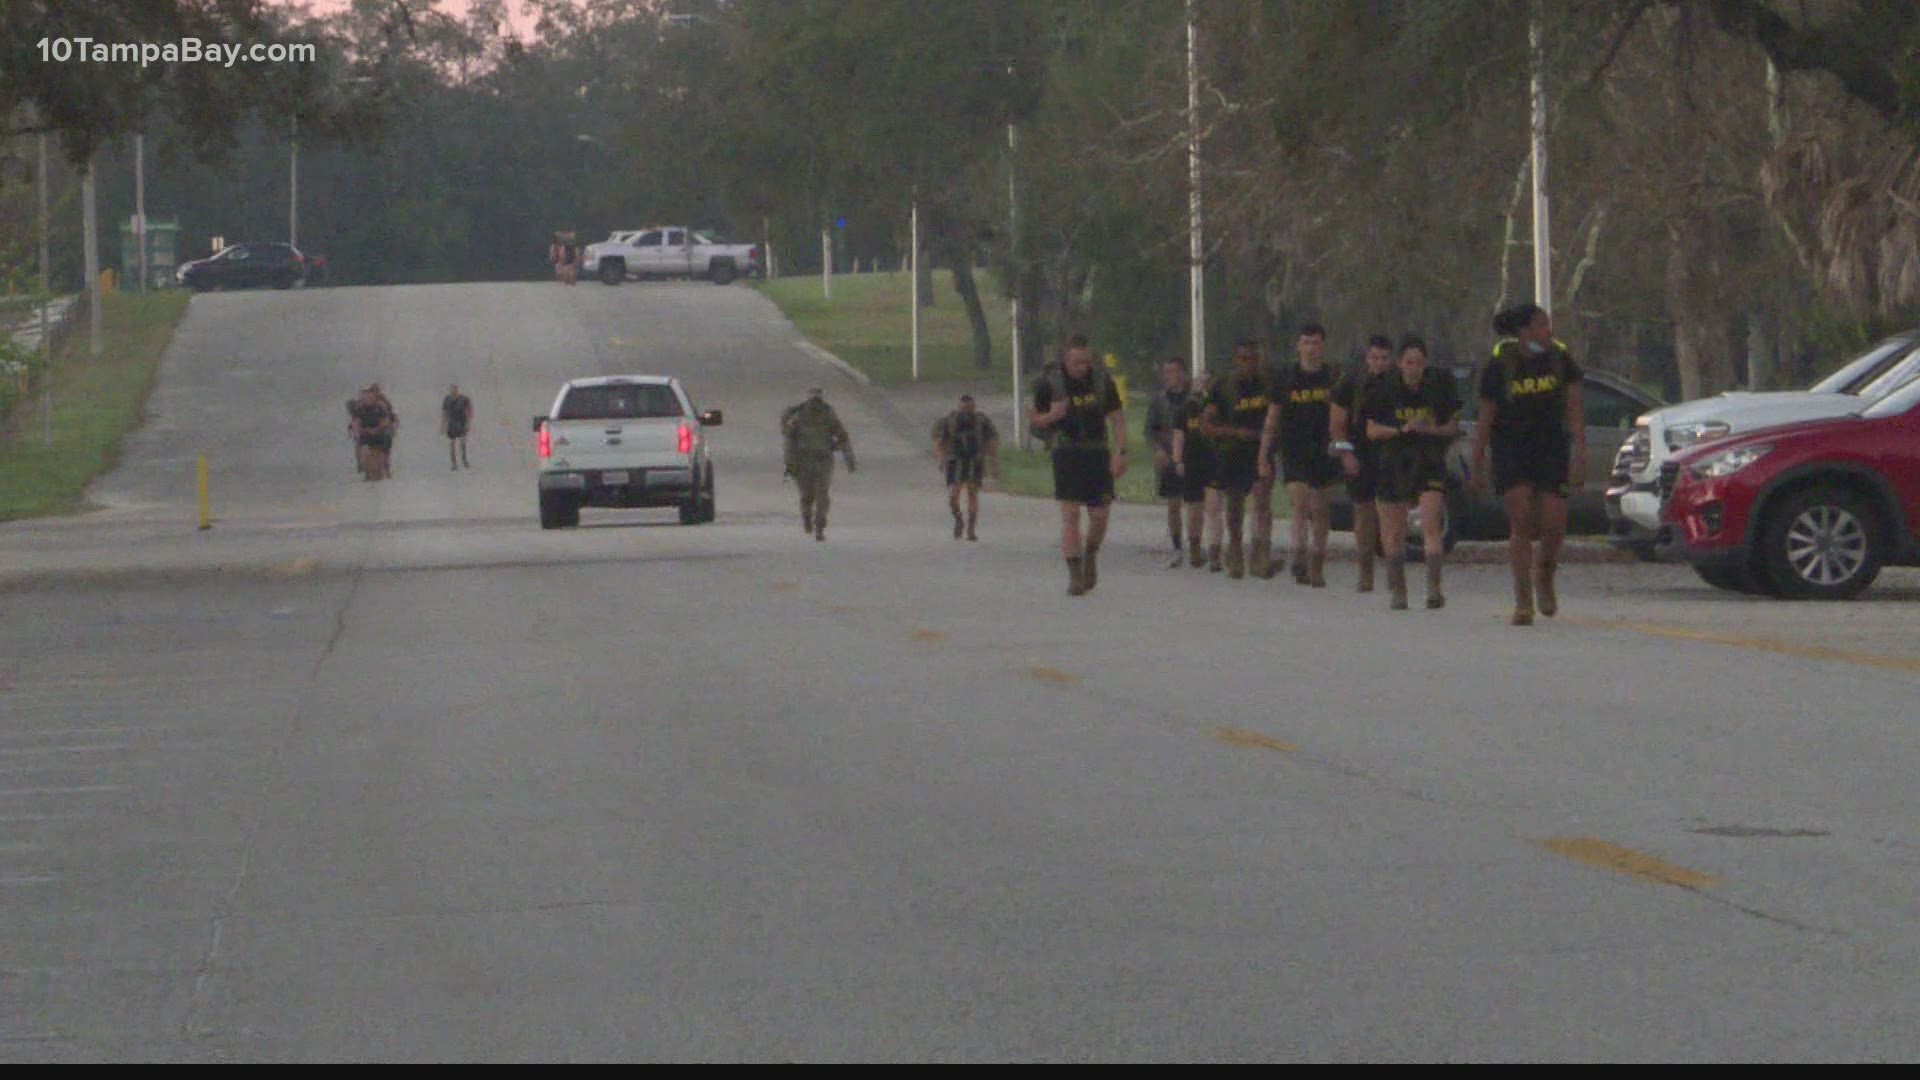 Army Cadets marched four miles with non-perishable food items on their backs to help  Community Food Pantry.